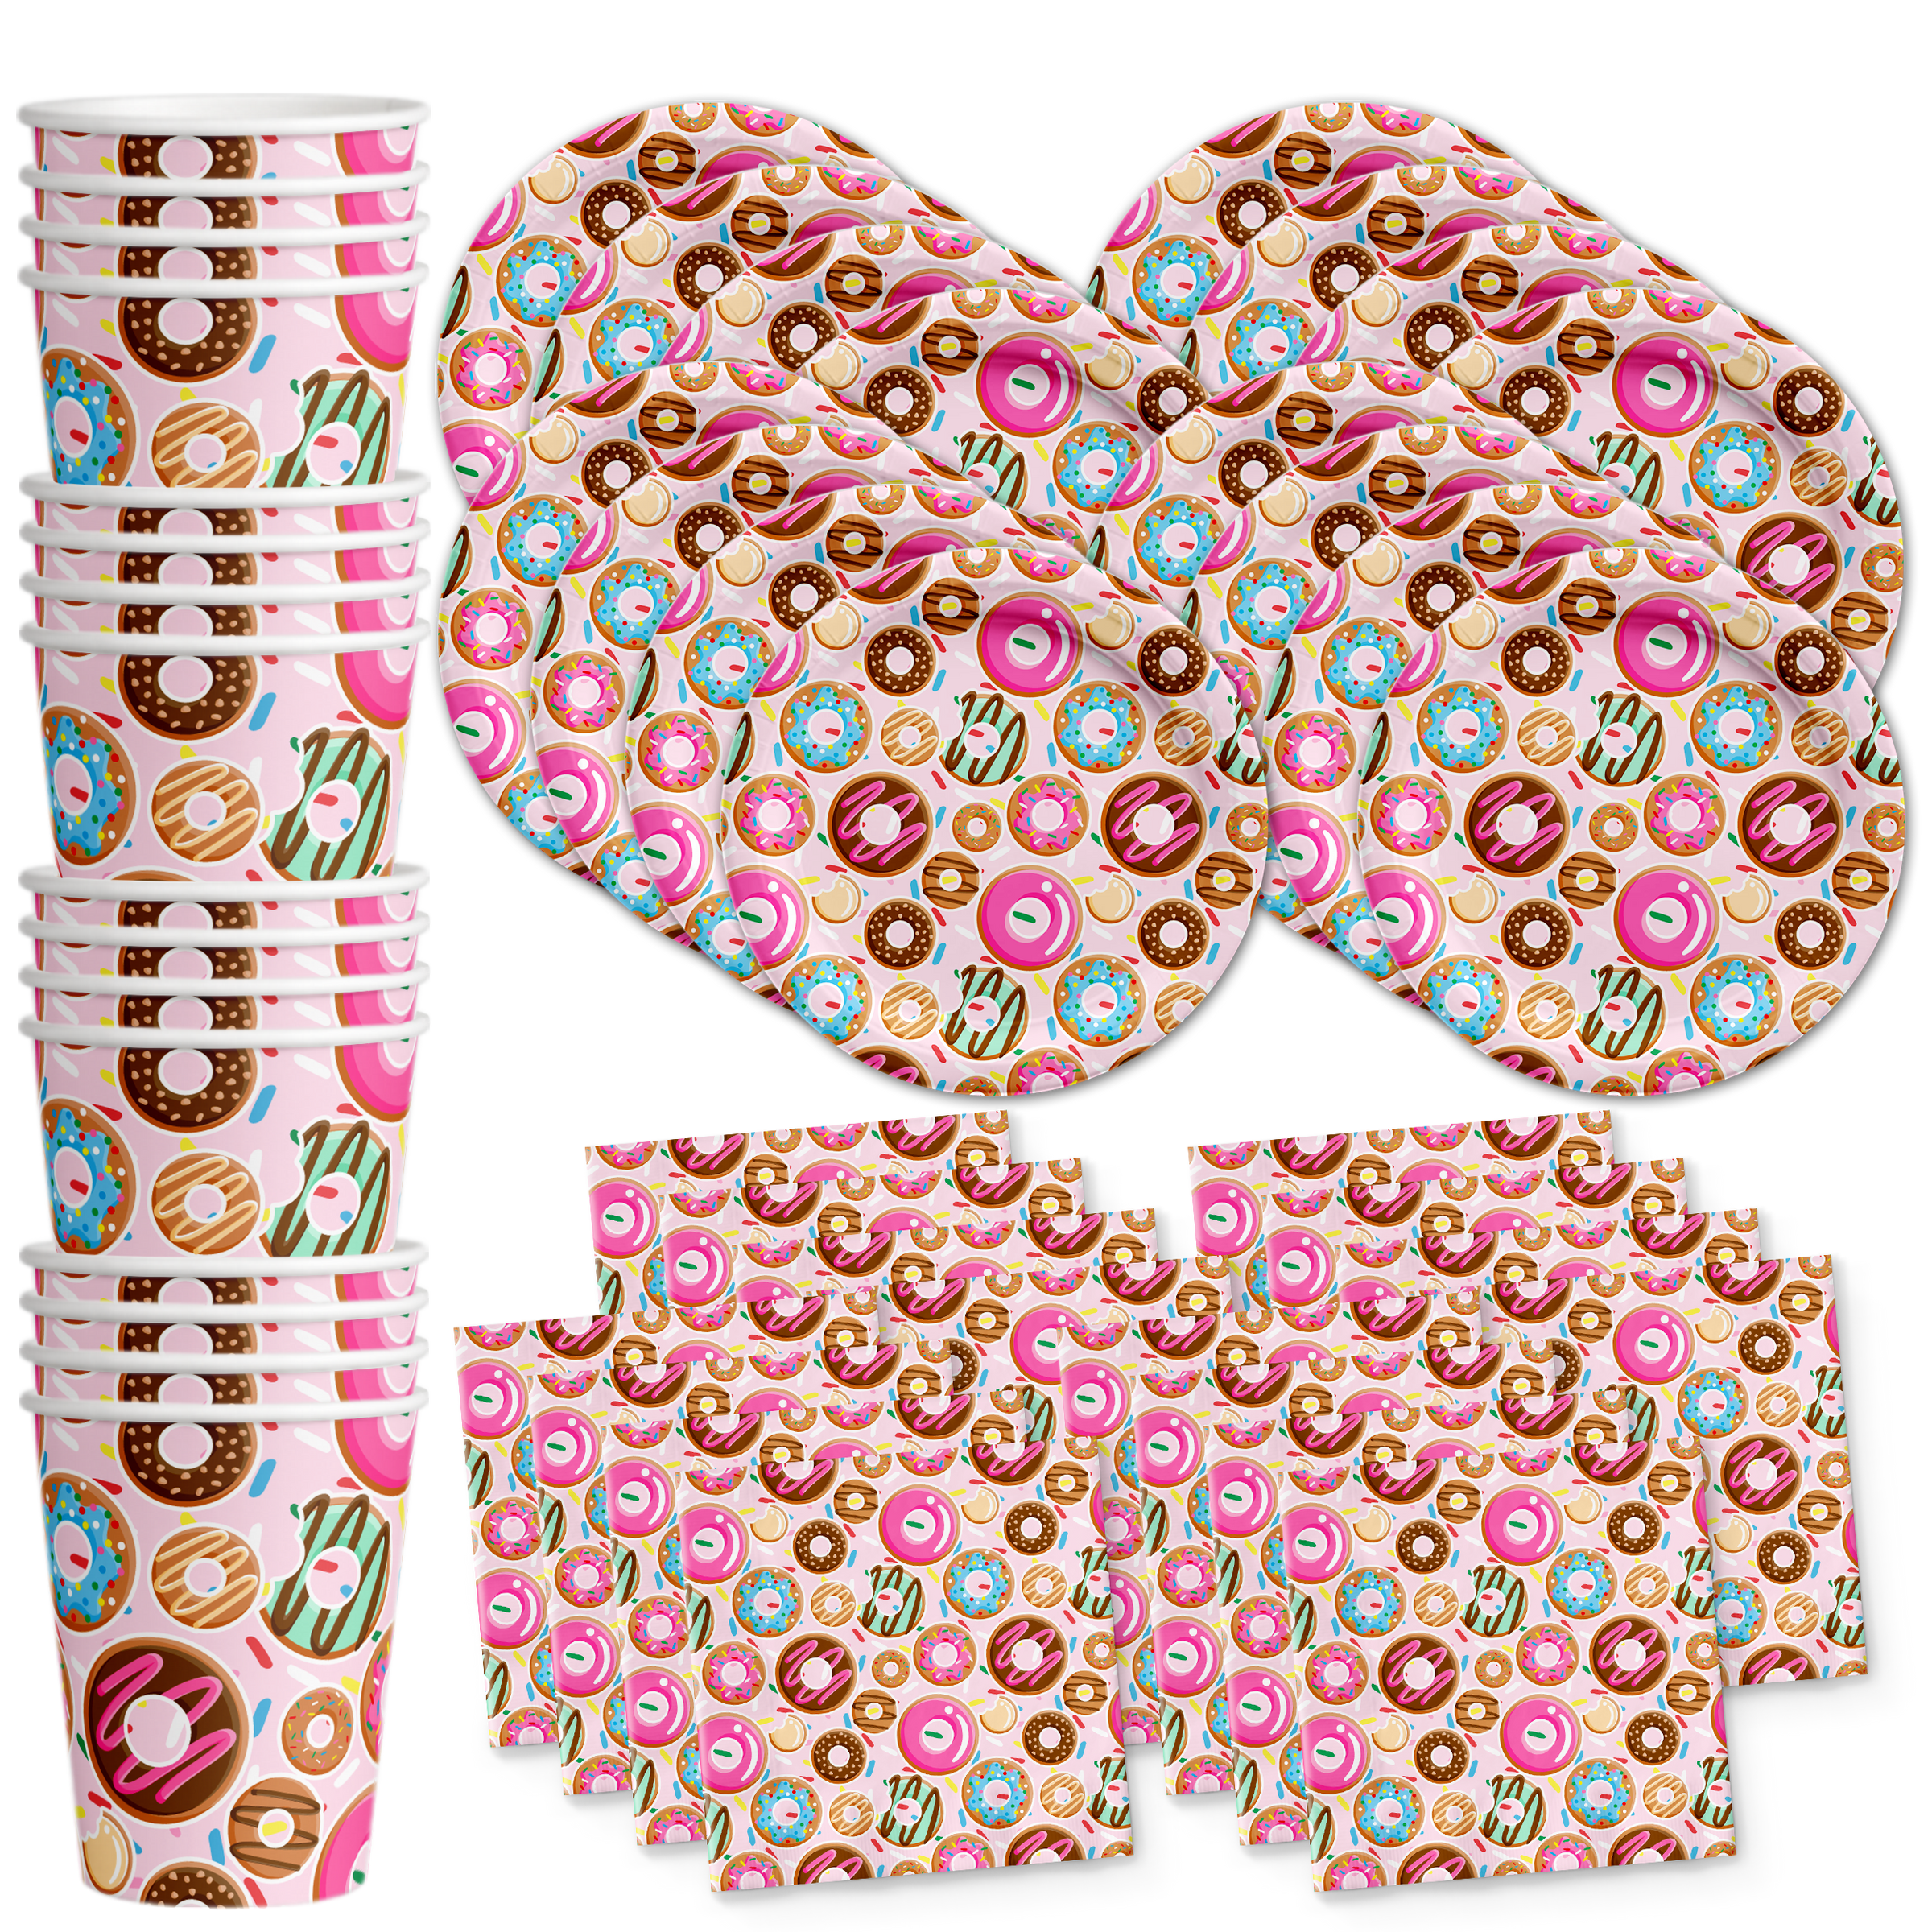 Donut Shoppe Birthday Party Tableware Kit For 16 Guests - BirthdayGalore.com